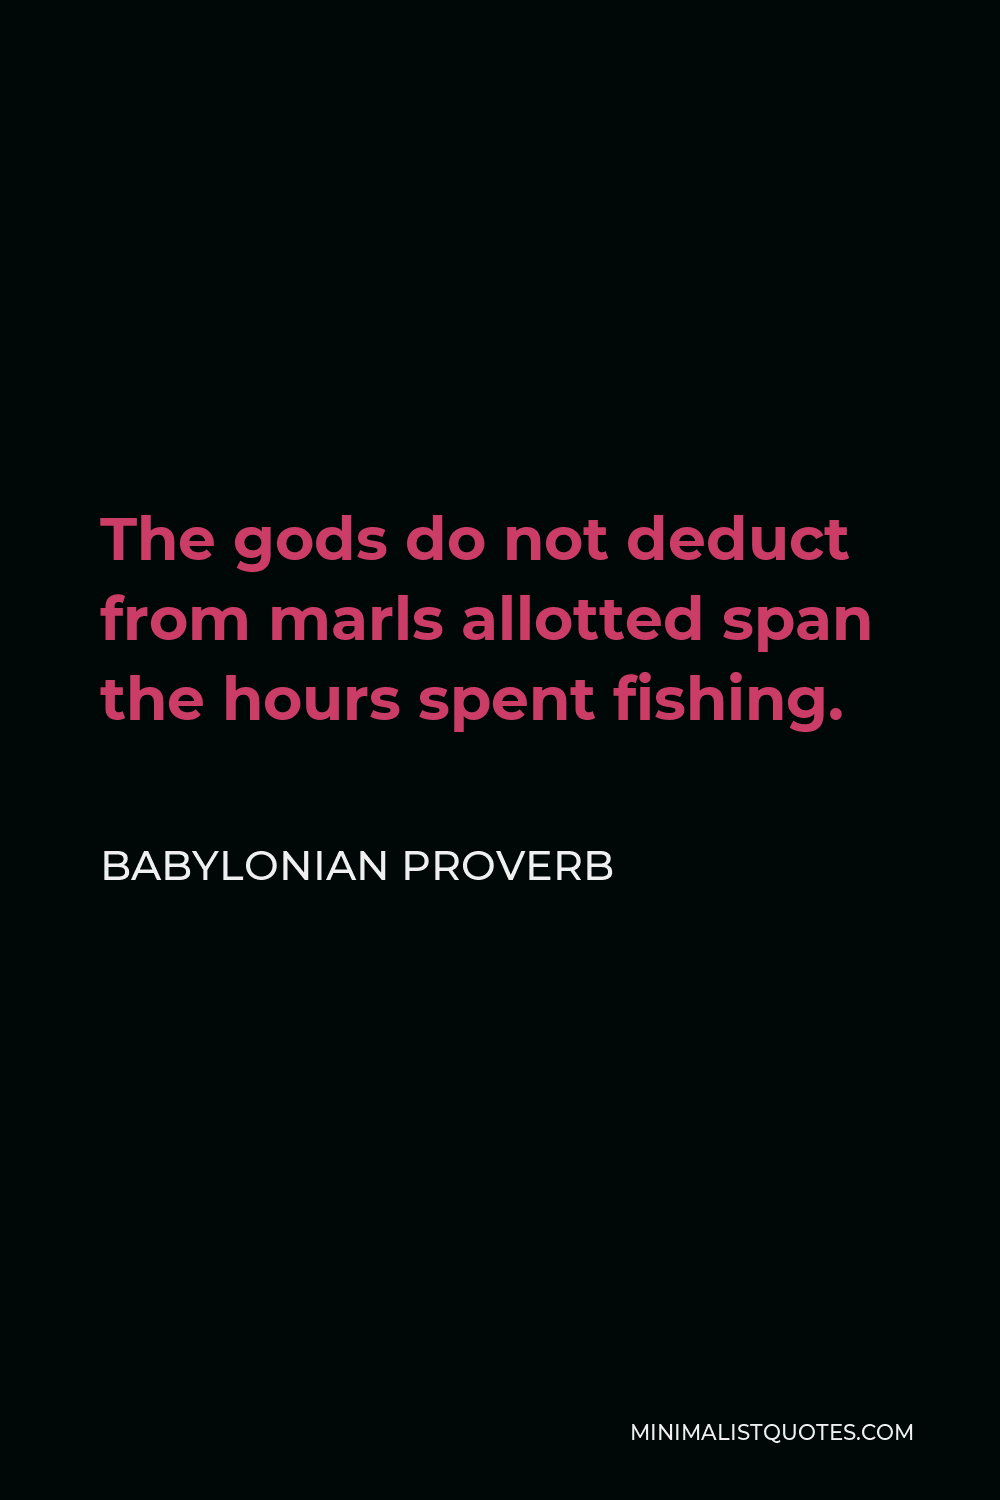 Babylonian Proverb Quote - The gods do not deduct from marls allotted span the hours spent fishing.